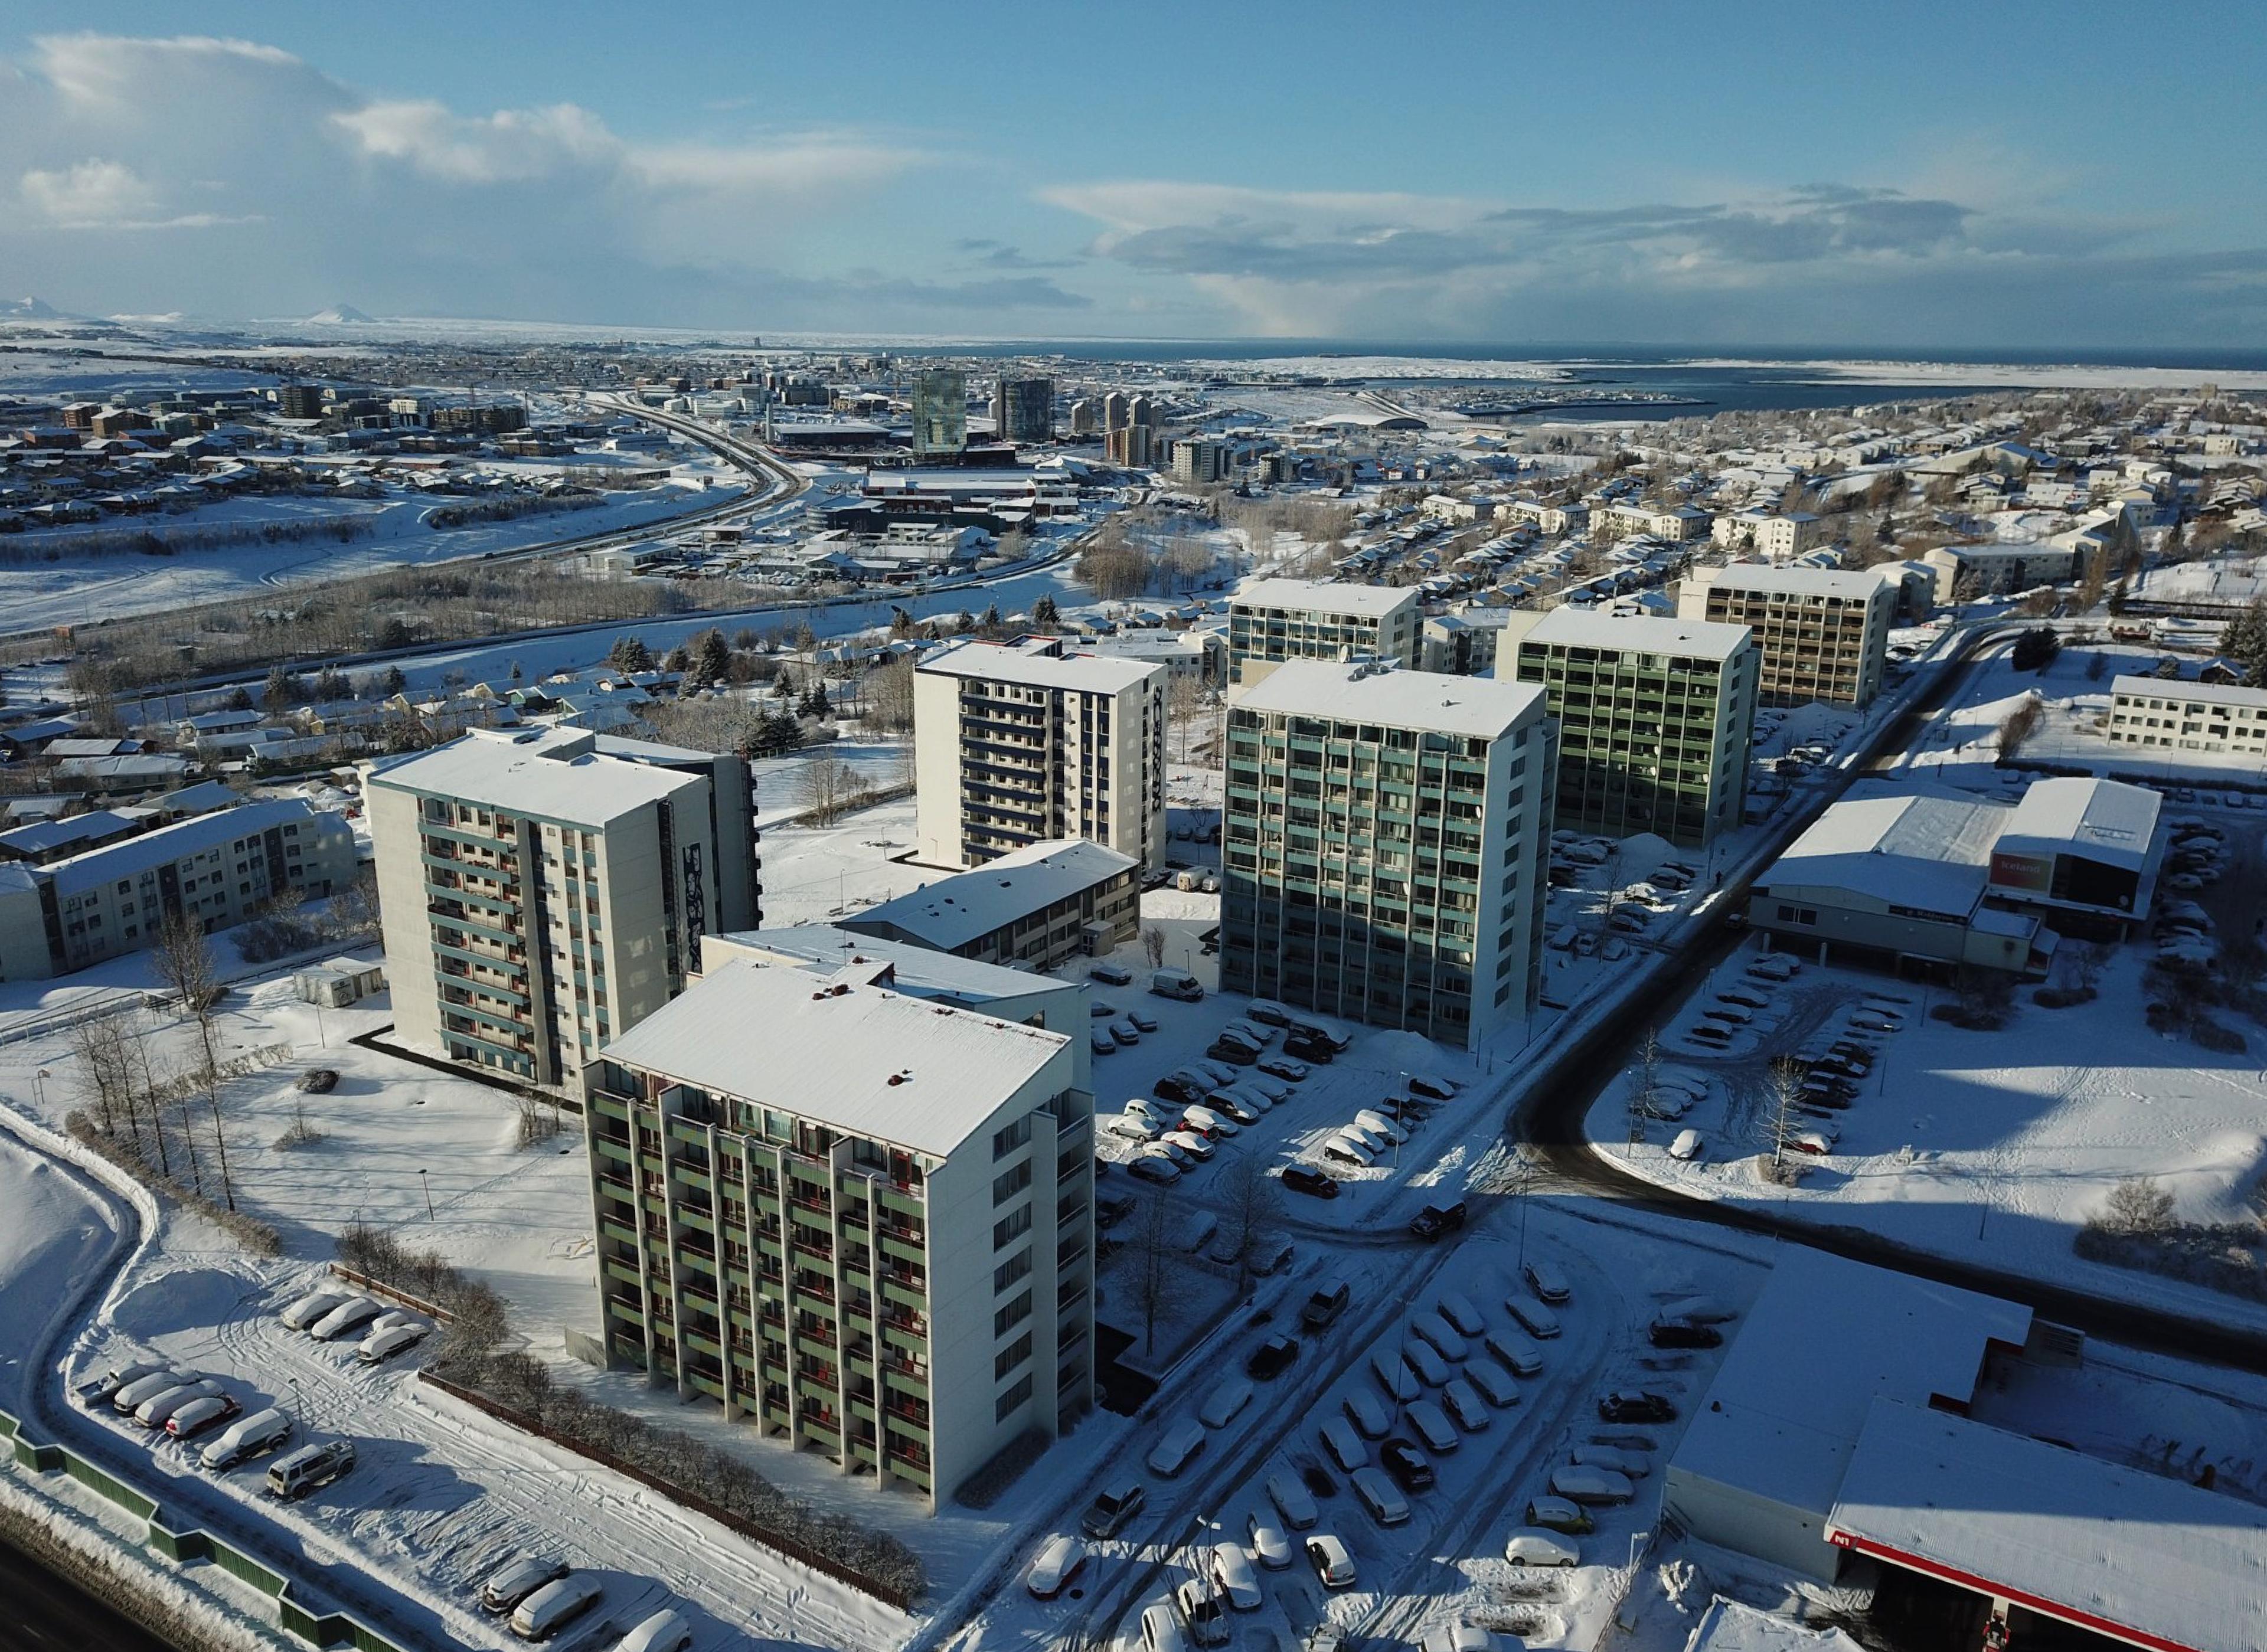 Aerial view of a residential district with tall buildings blanketed in snow during winter